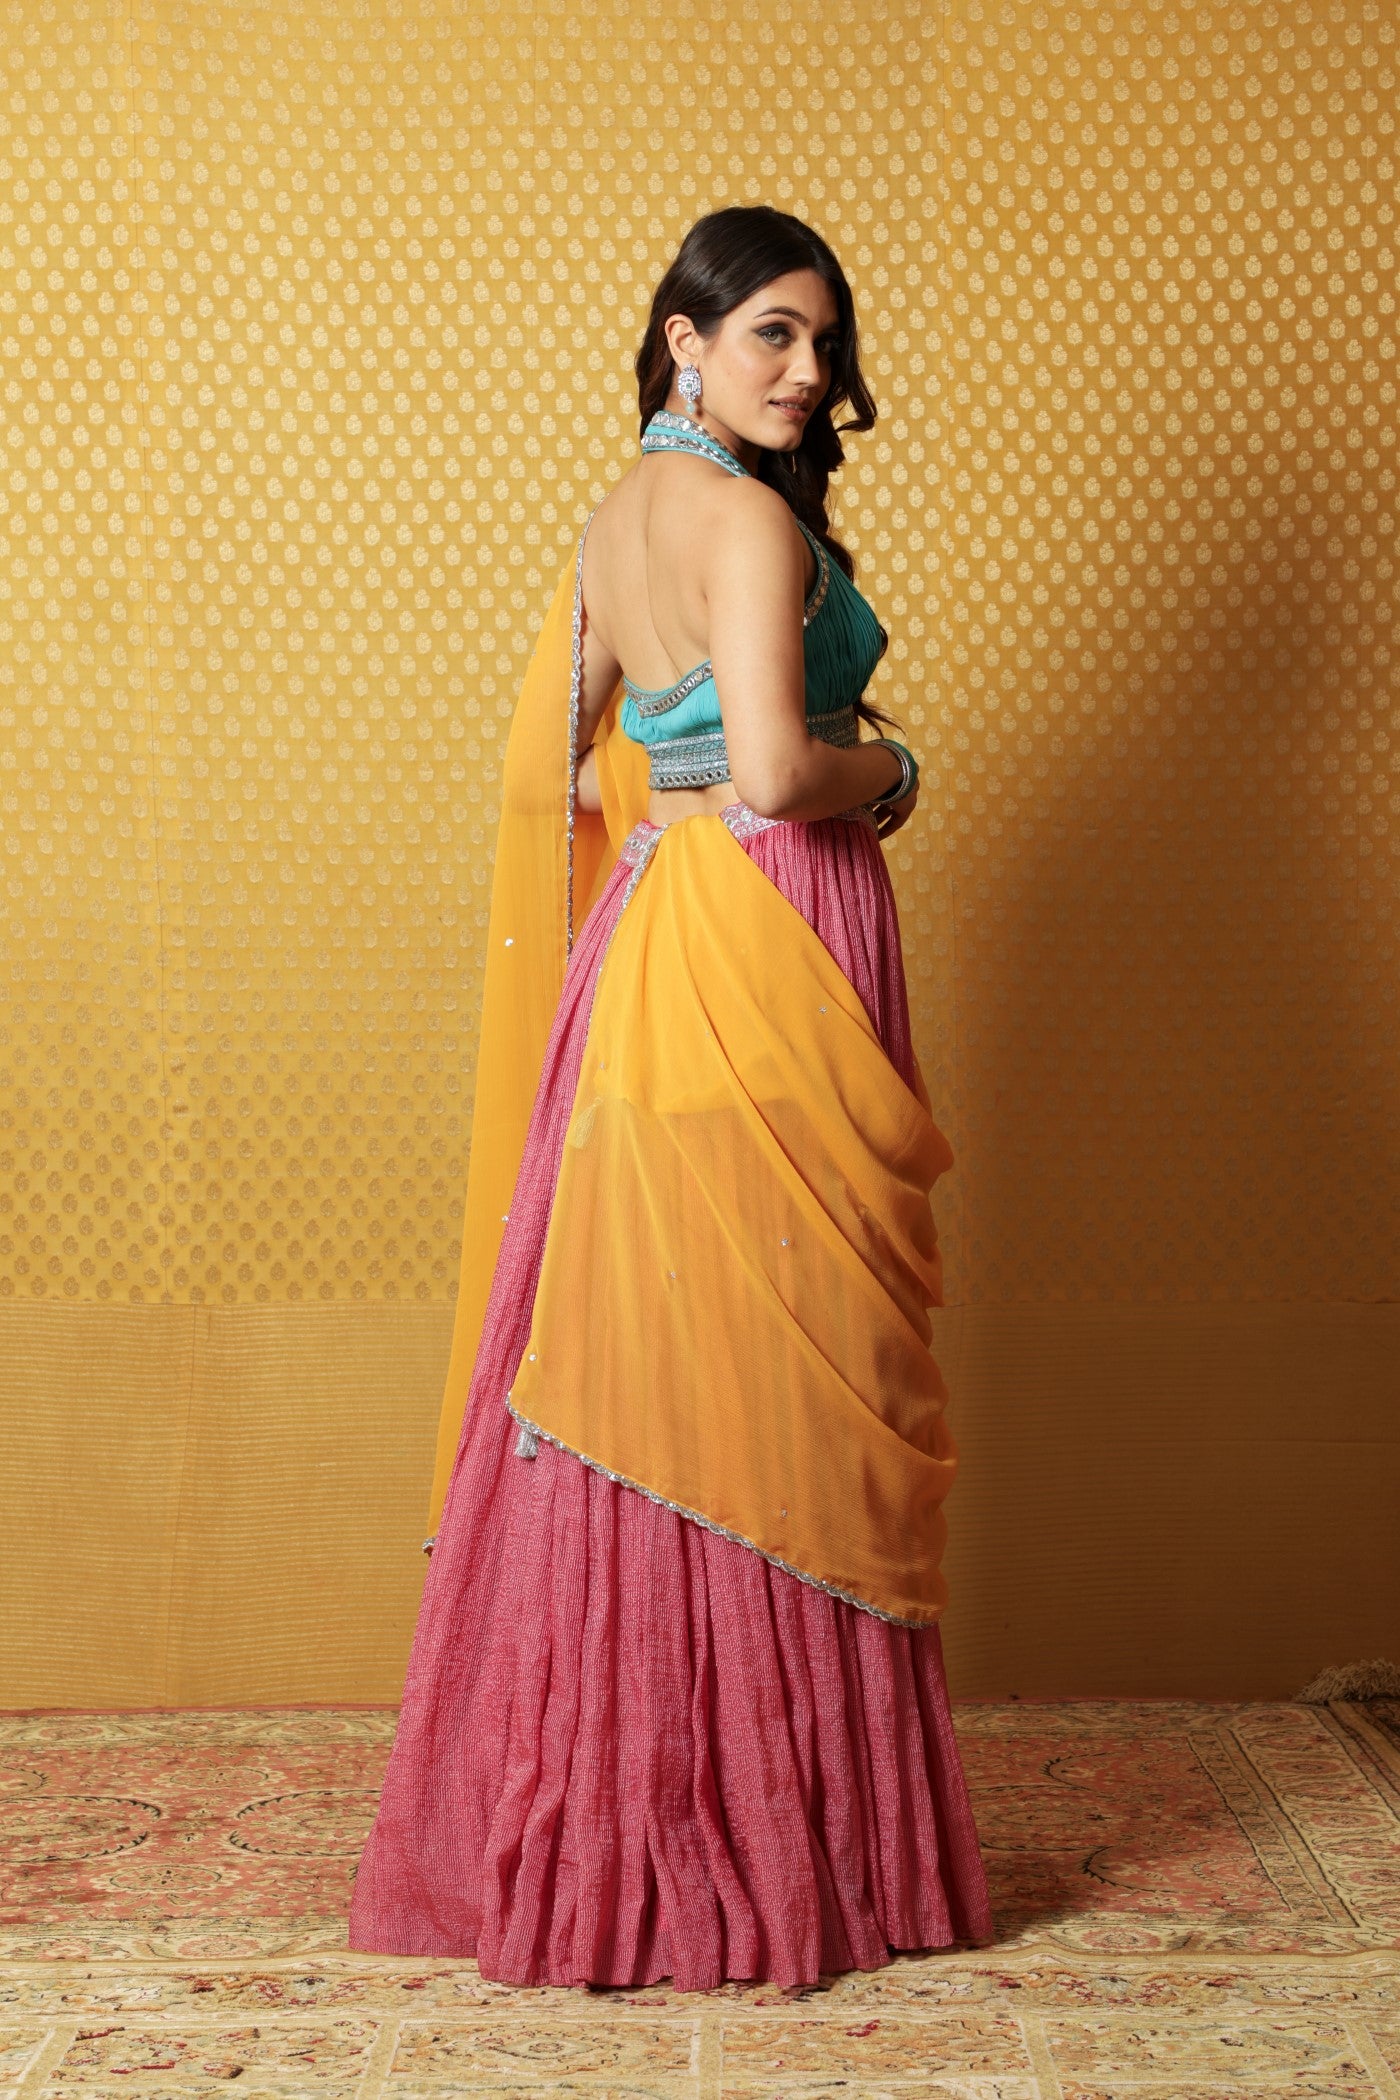 Hand-Embroidered Pink & Sea-Blue Pure Cotton-Silk With Metallic Checks Lehenga Paired With Georgette Blouse & Chiffon Dupatta
(Pink, Sea-Blue & Sunset-Yellow))